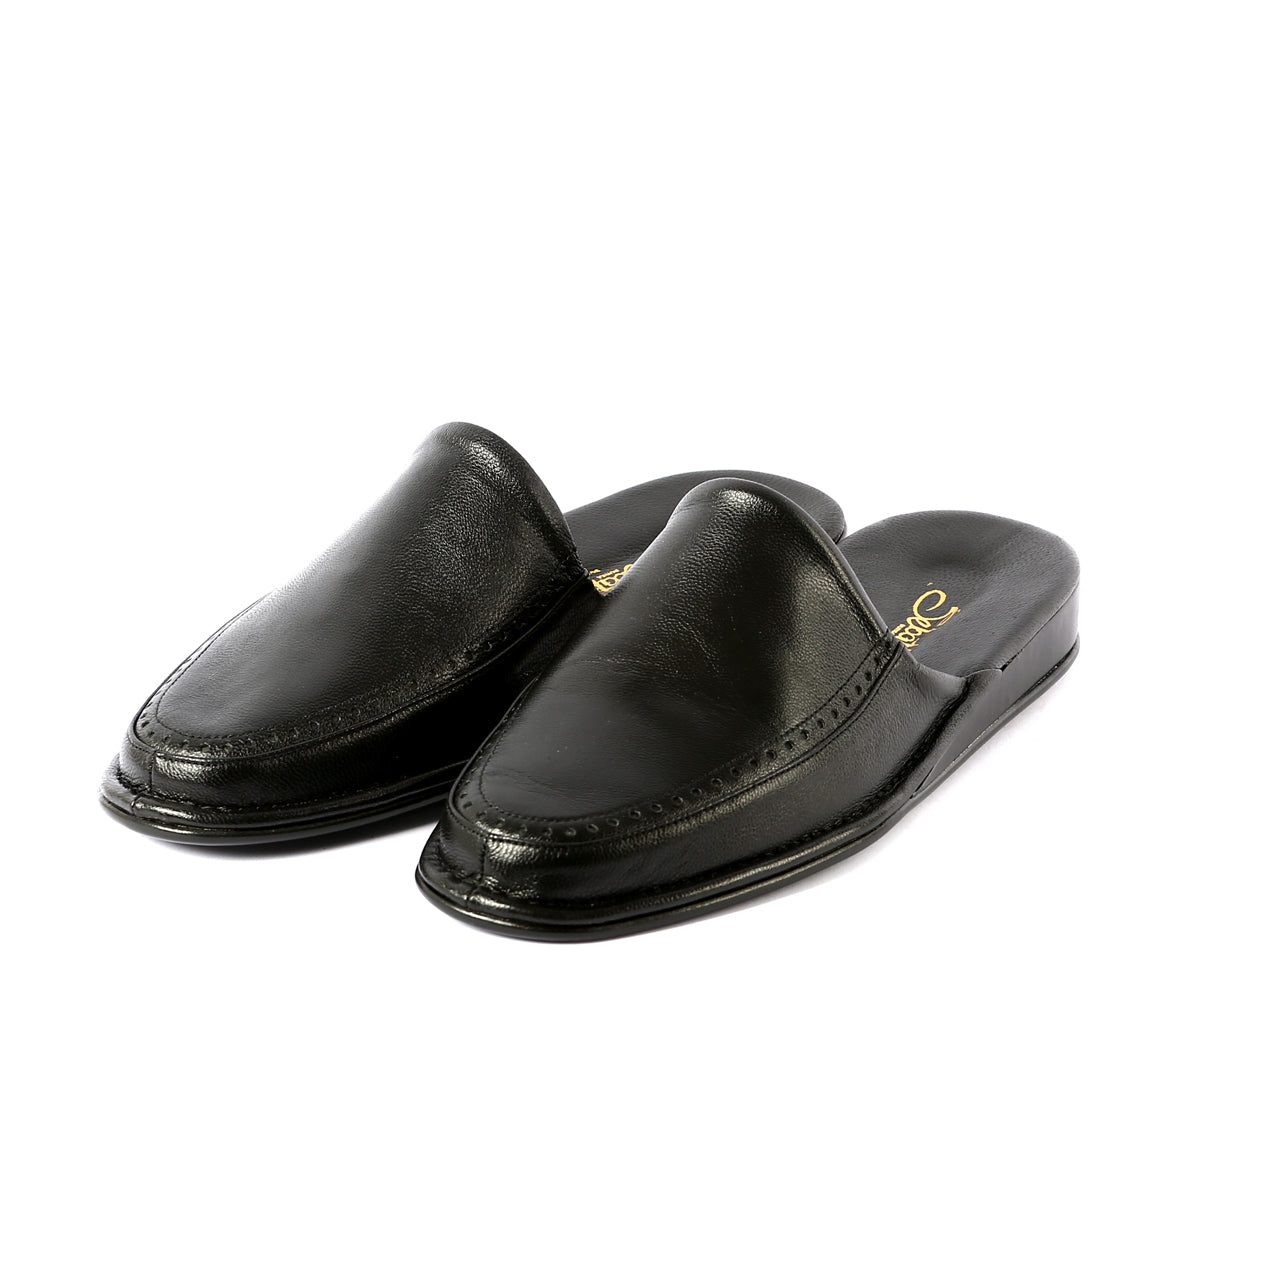 Clark leather slippers with leather sole – Princetown Slippers